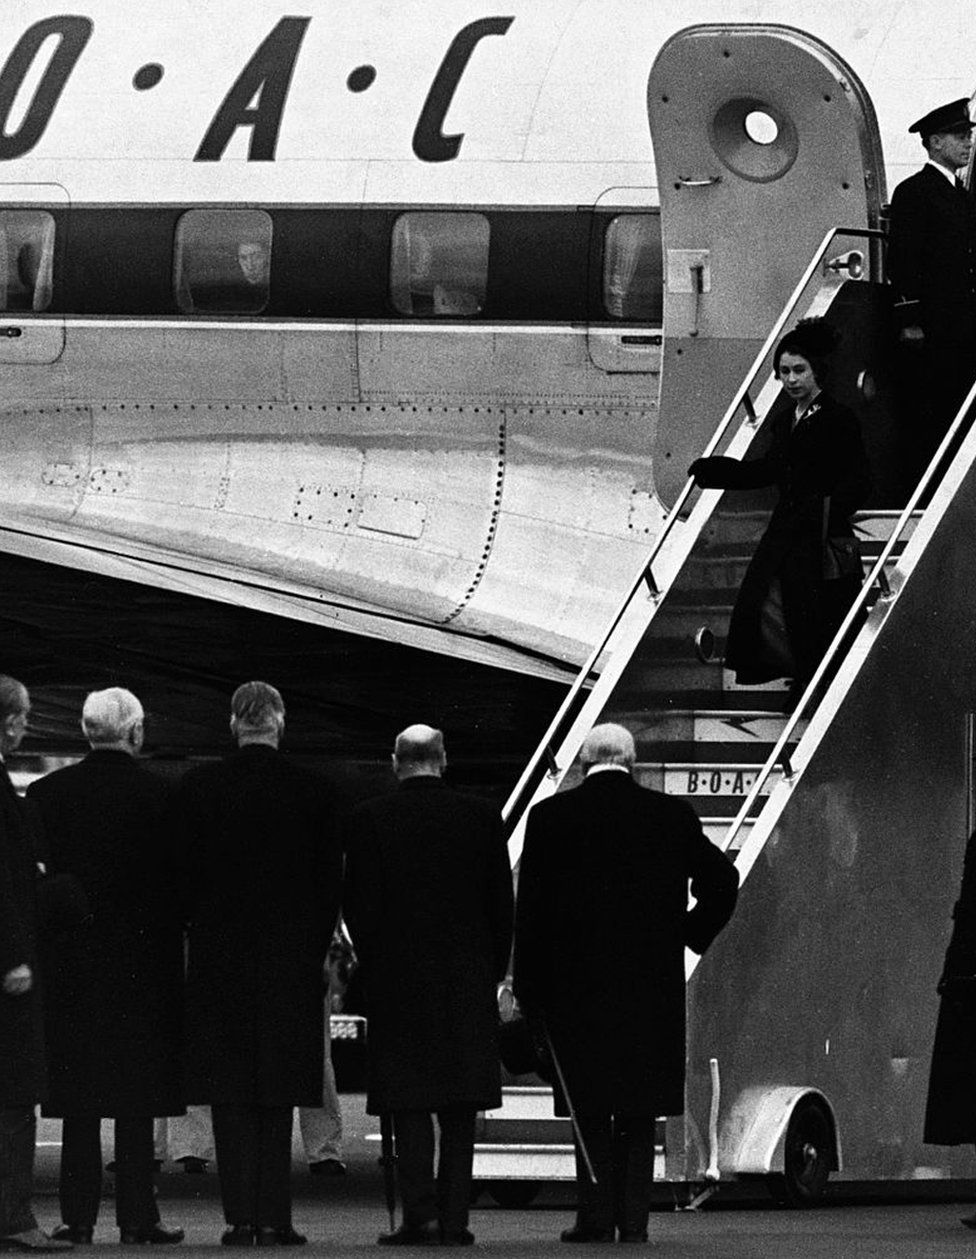 The Queen arrives back in Britain from Nairobi following the death of her father George VI, and is met by the politicians (second l to r) Lord Woolton, Anthony Eden, Clement Atlee and Winston Churchill.